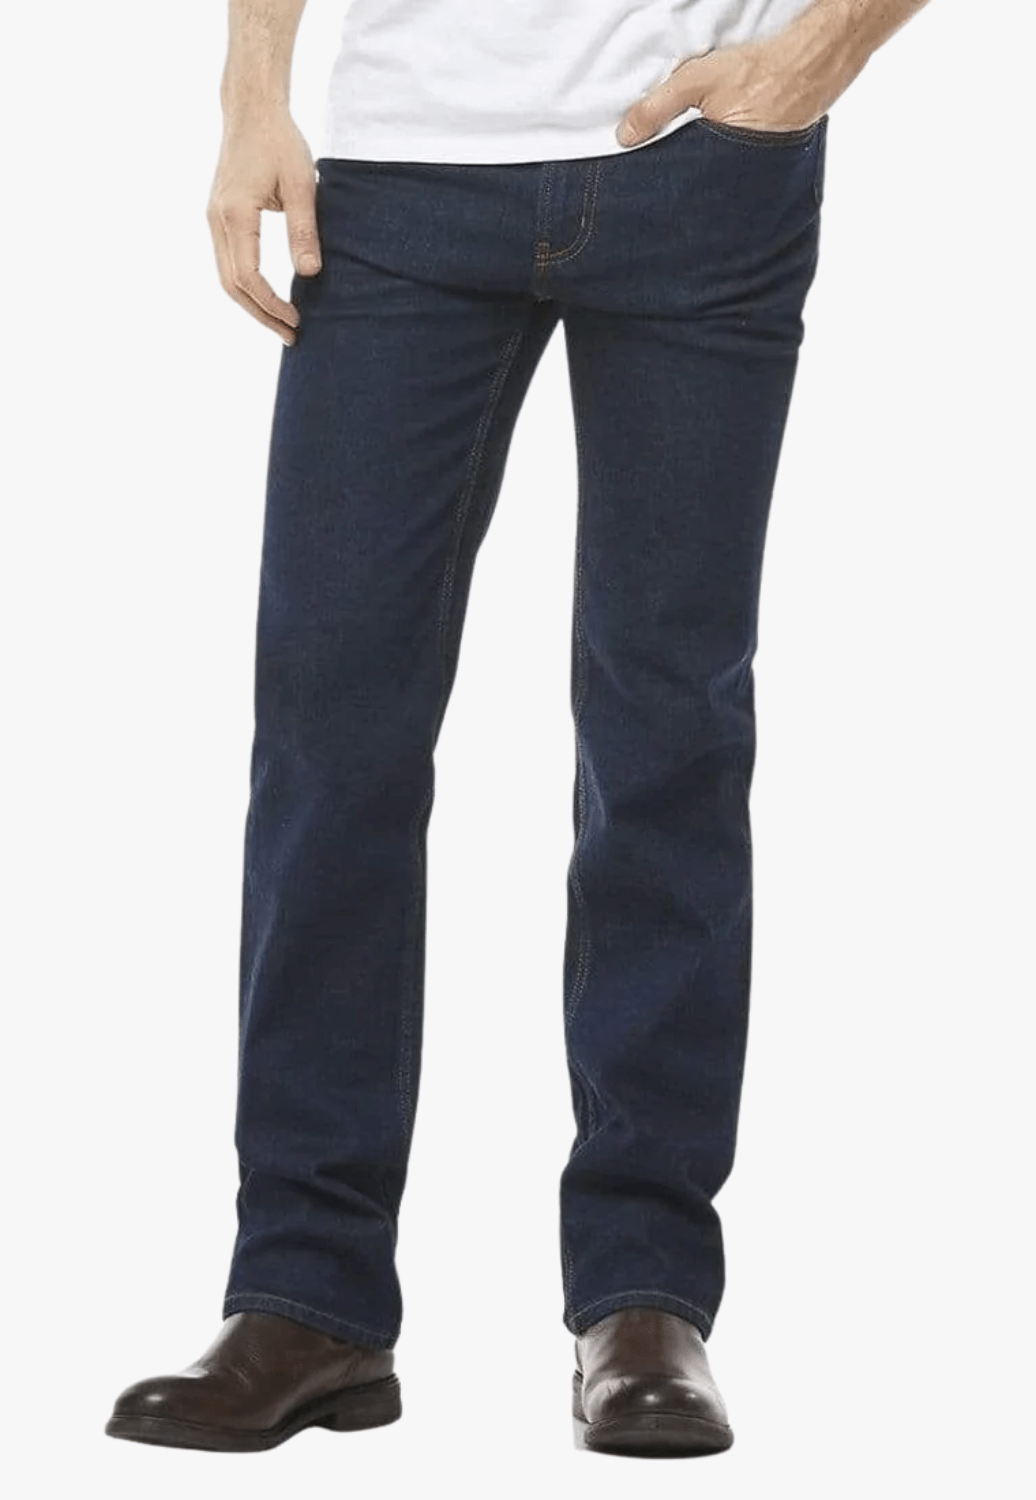 Lee Riders CLOTHING-Mens Jeans Lee Riders Mens Straight Stretch Jean